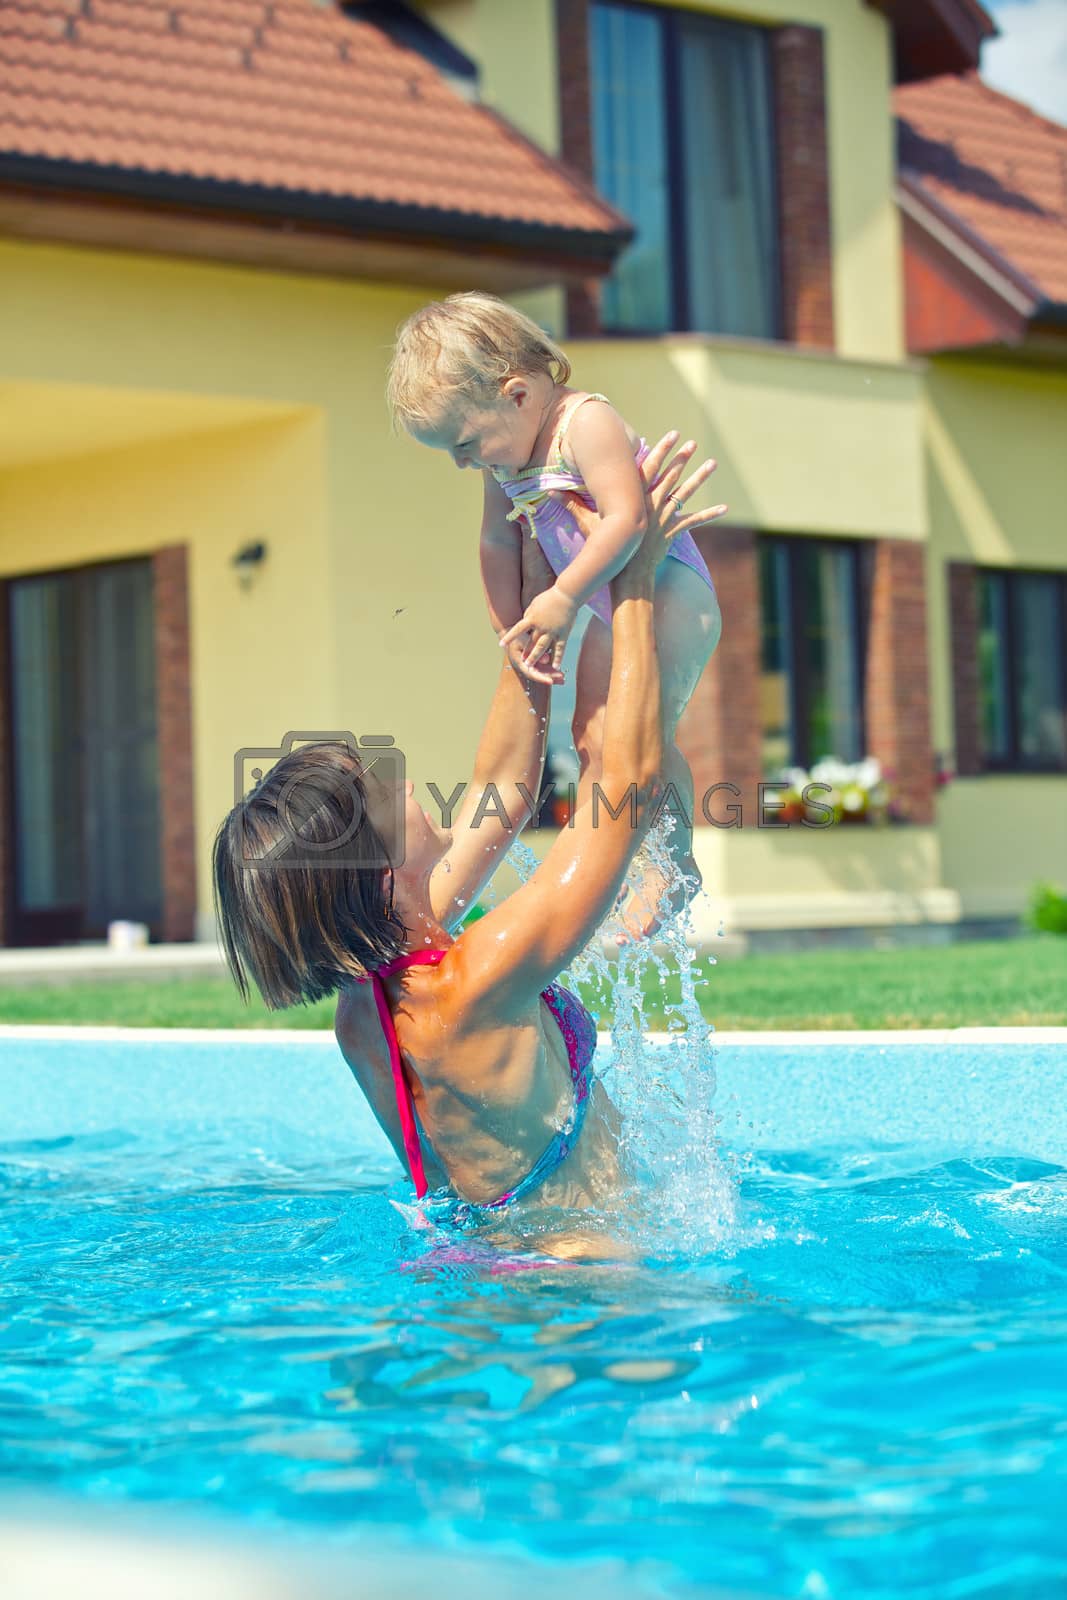 Royalty free image of Girl with mother in the pool by maxoliki